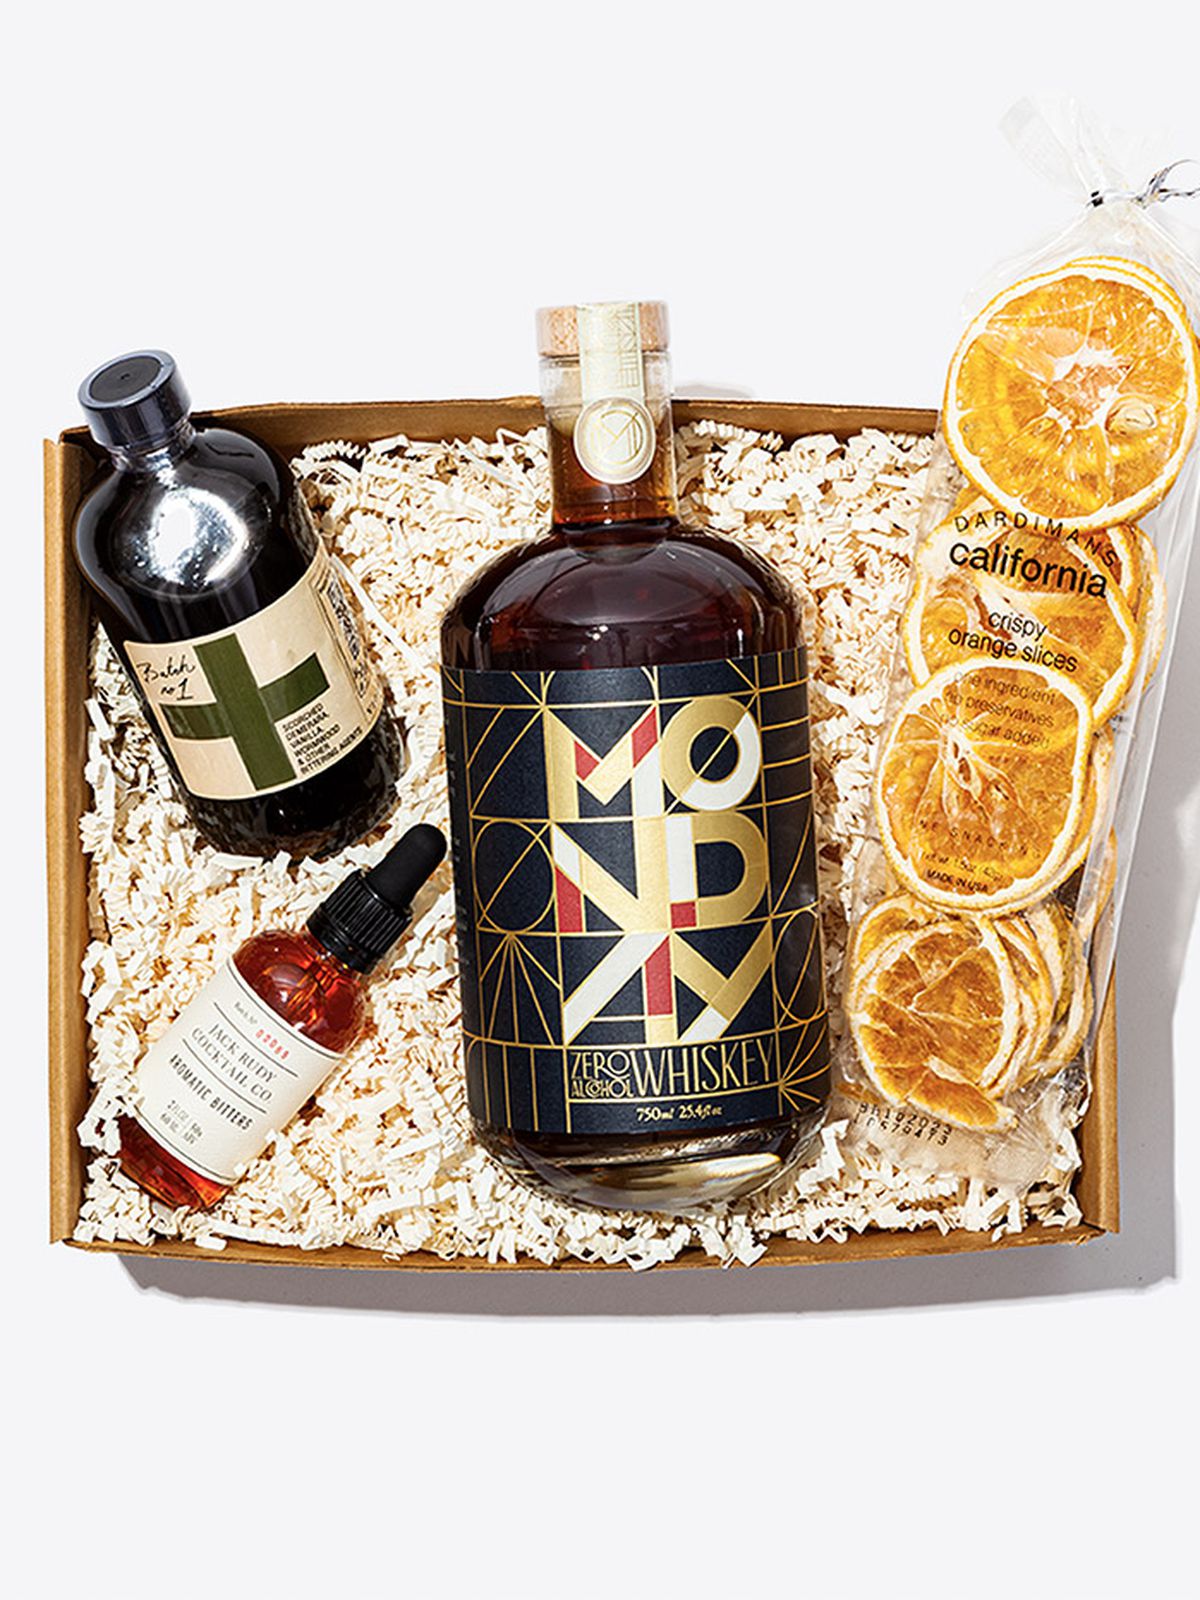 A box with a bottle of Monday non-alcoholic spirit, a bag of dried orange slices, a jar of bitters, and a bottle of old fashioned mix